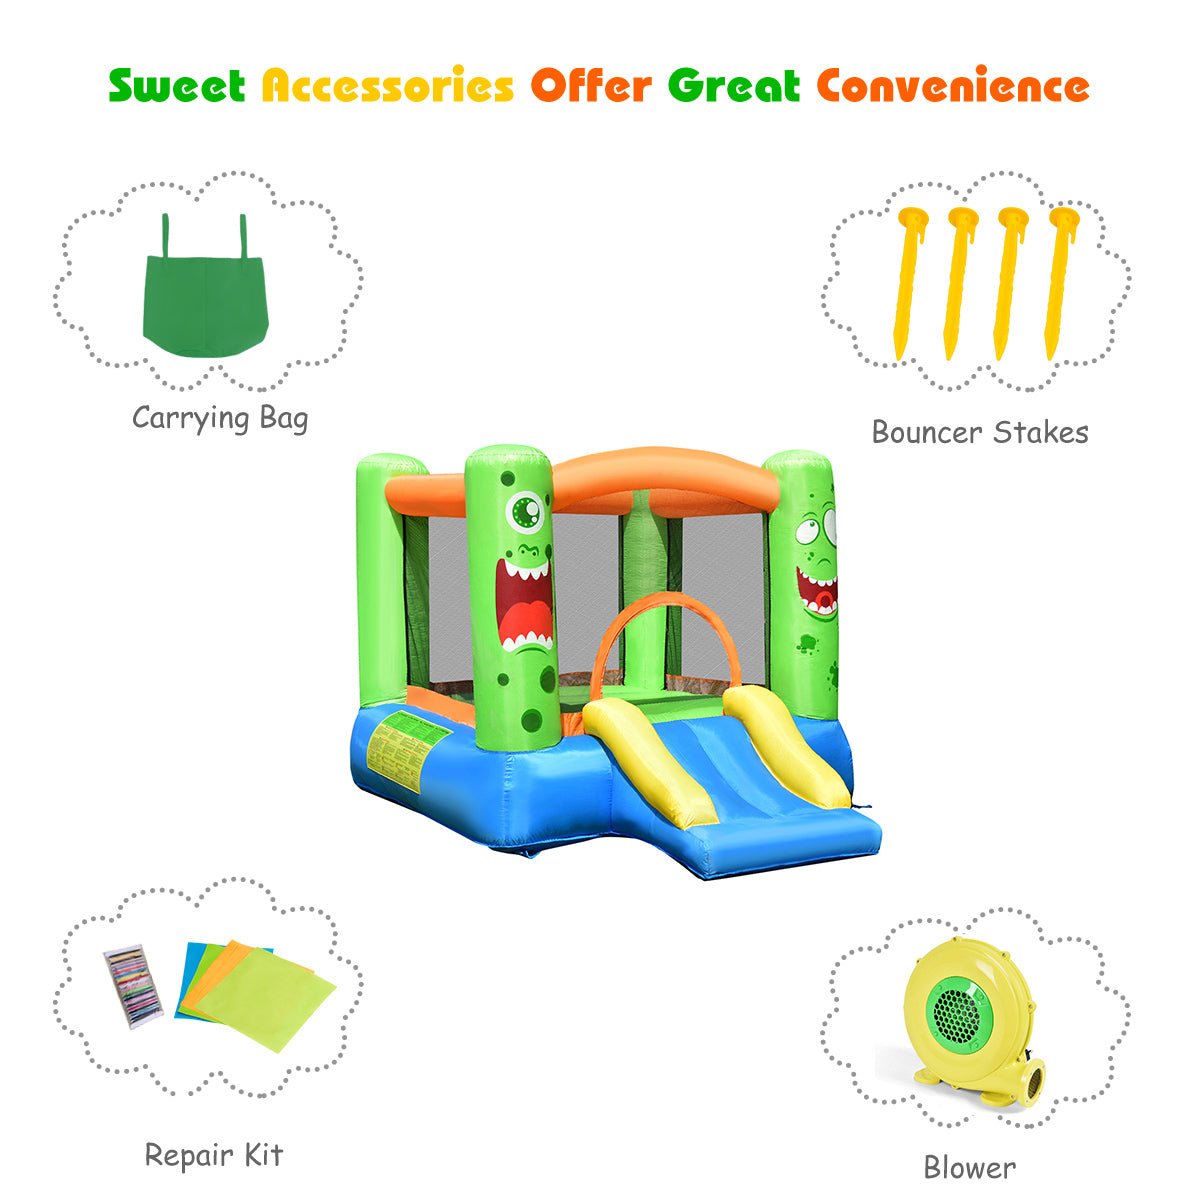 Kids Bounce House with Slide - Basketball Rim for Energetic Play